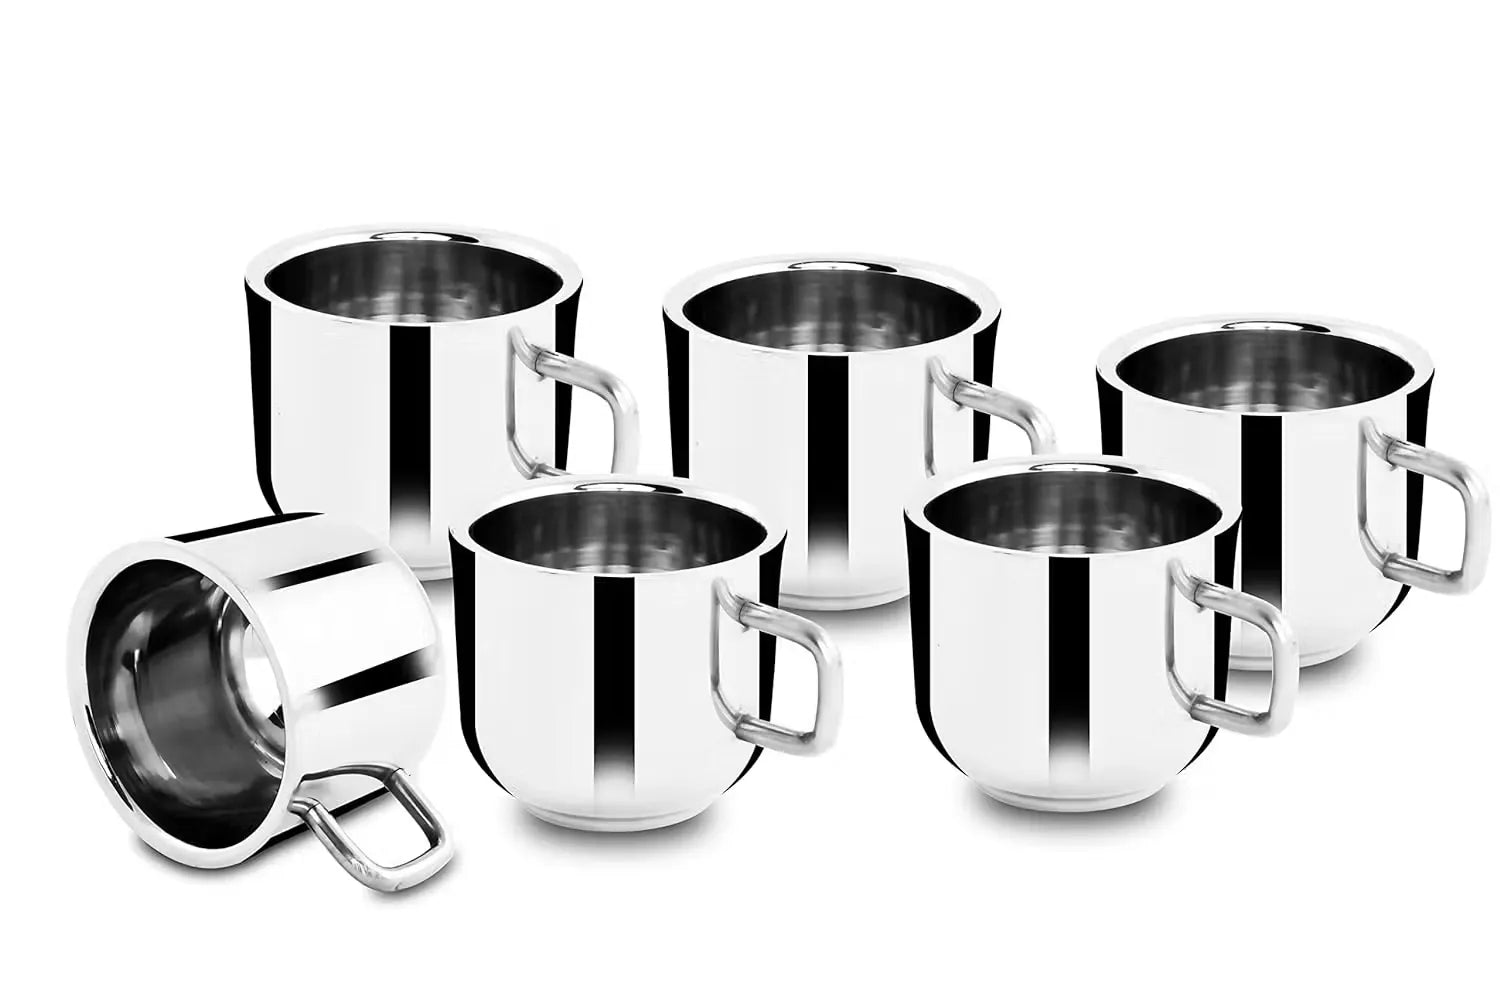 Set of 6 Classic Essentials double-wall tea cups, perfect for enjoying your favorite beverage. Sleek and stylish stainless steel tea cups that keep drinks hot or cold for longer. Enjoy a relaxed tea break with these 60ml double-wall tea cups from Classic Essentials. Pack of 6 Classic Essentials double-wall tea cups, each holding 60ml. Made from stainless steel for durability and insulation. Dishwasher-safe for easy cleaning.